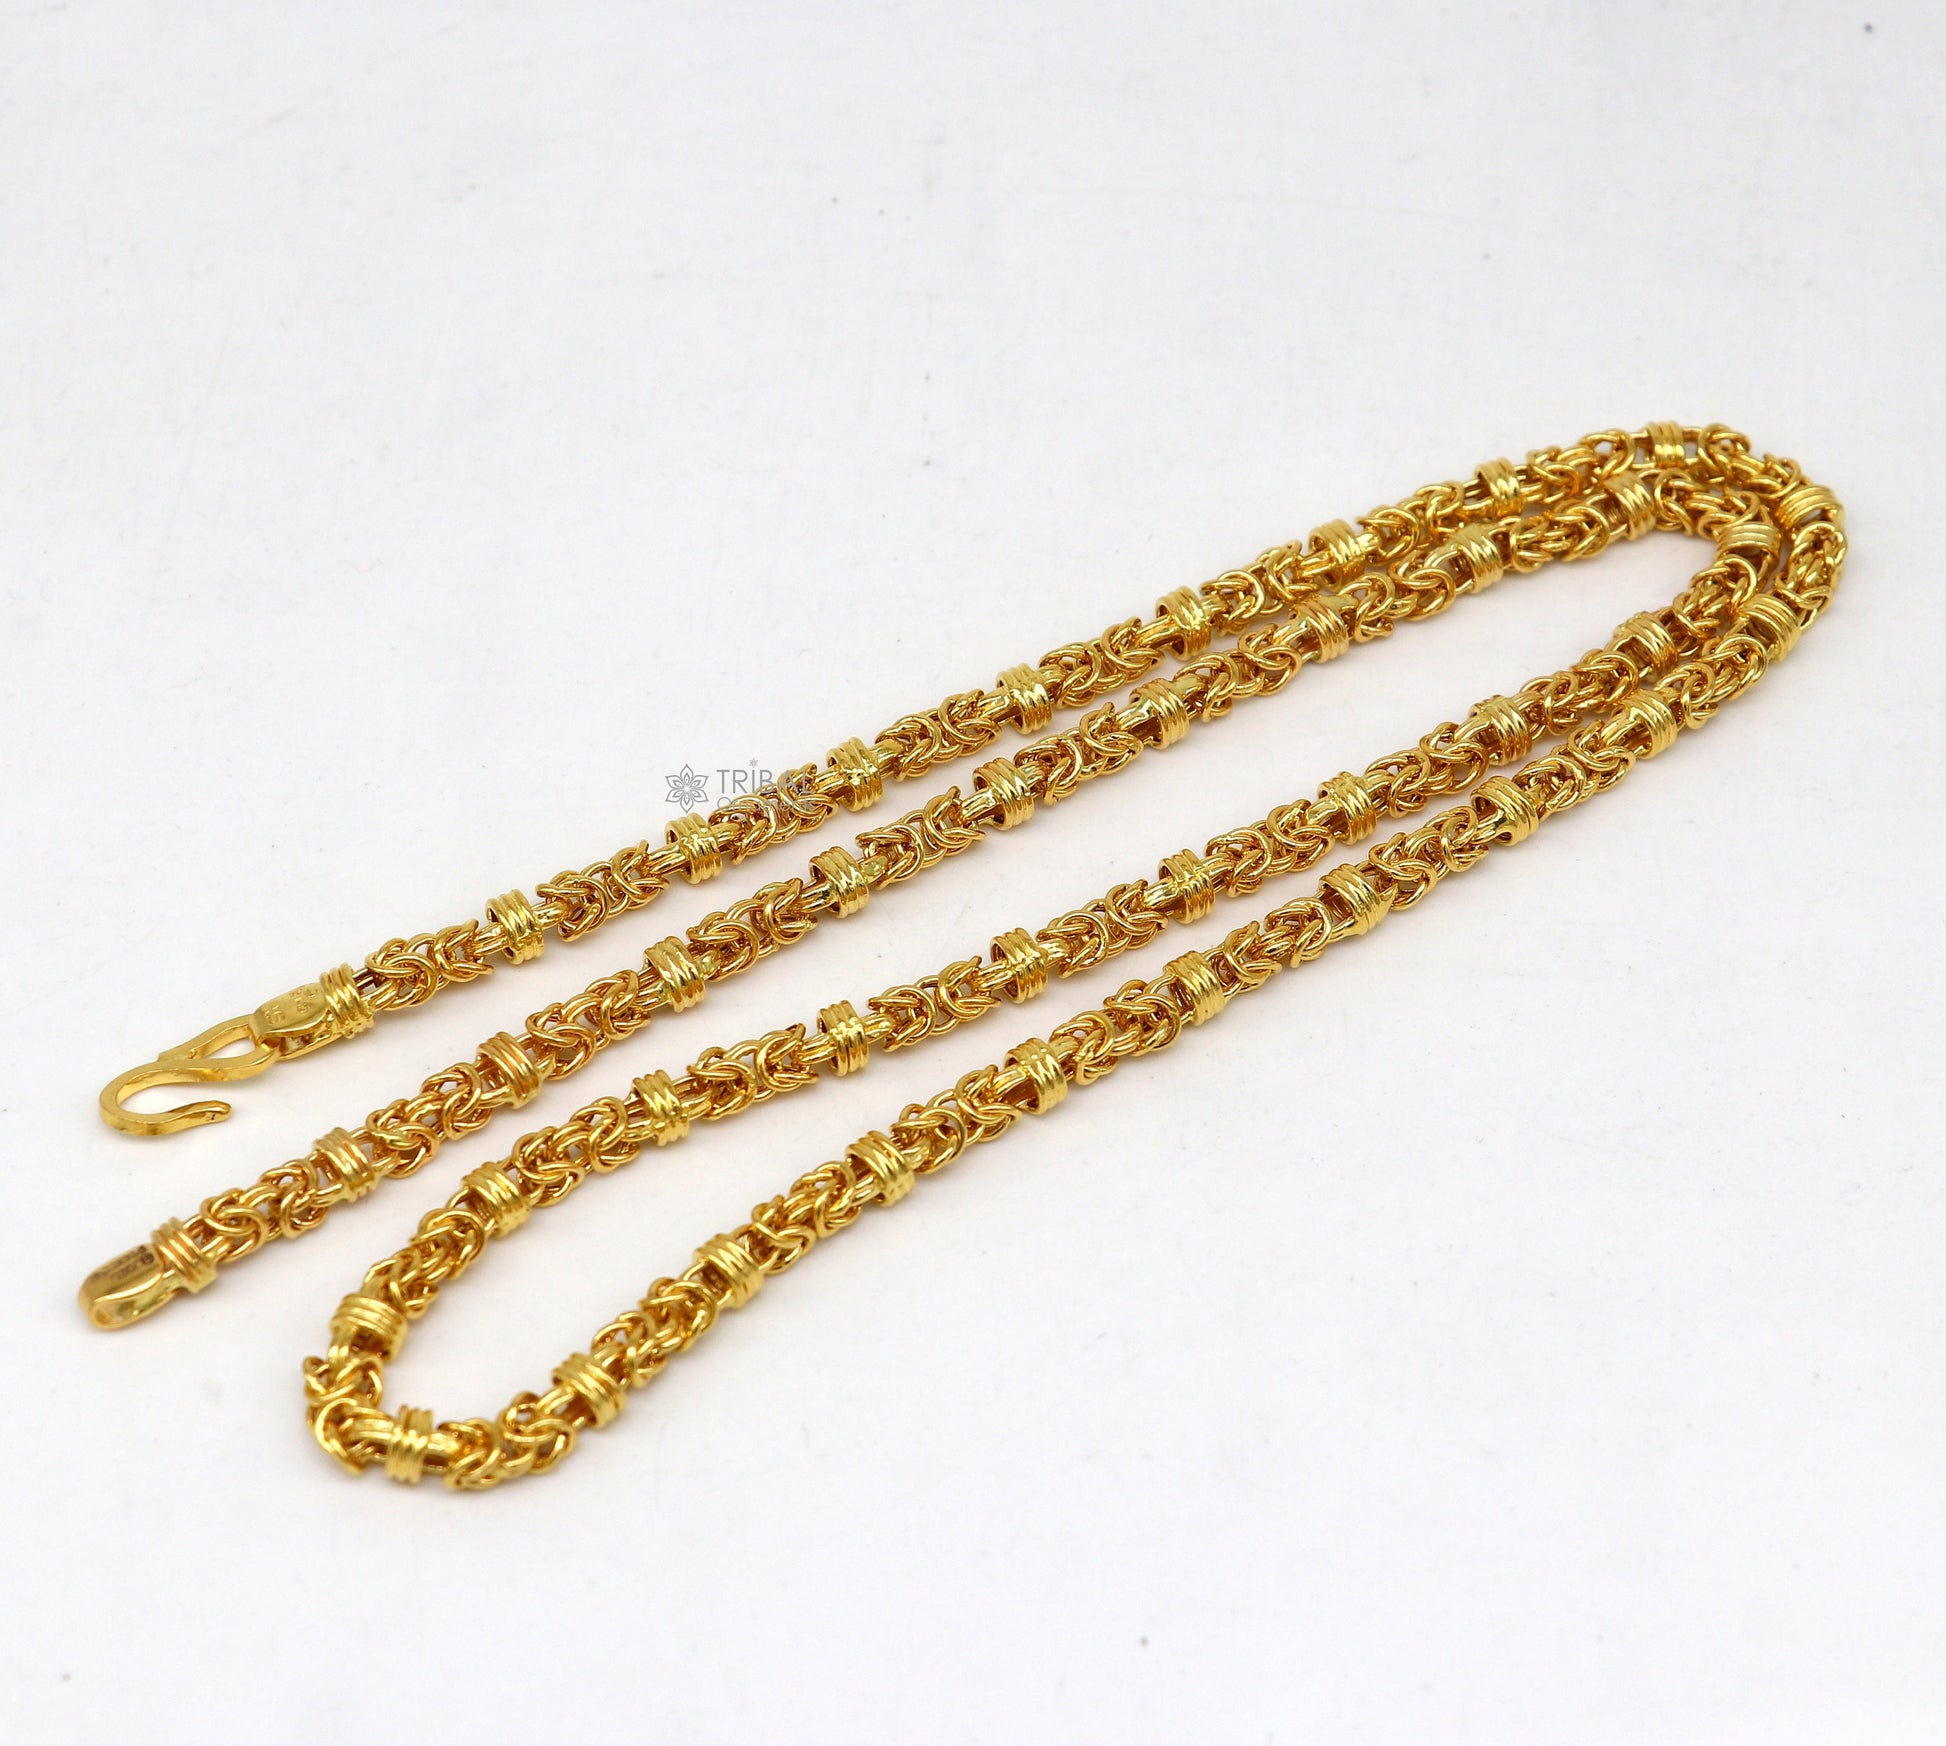 All size authentic hallmarked 22kt 22ct gold 20 to 26 inches long handmade fabulous byzantine stylish chain necklace unisex gifting gch588 - TRIBAL ORNAMENTS